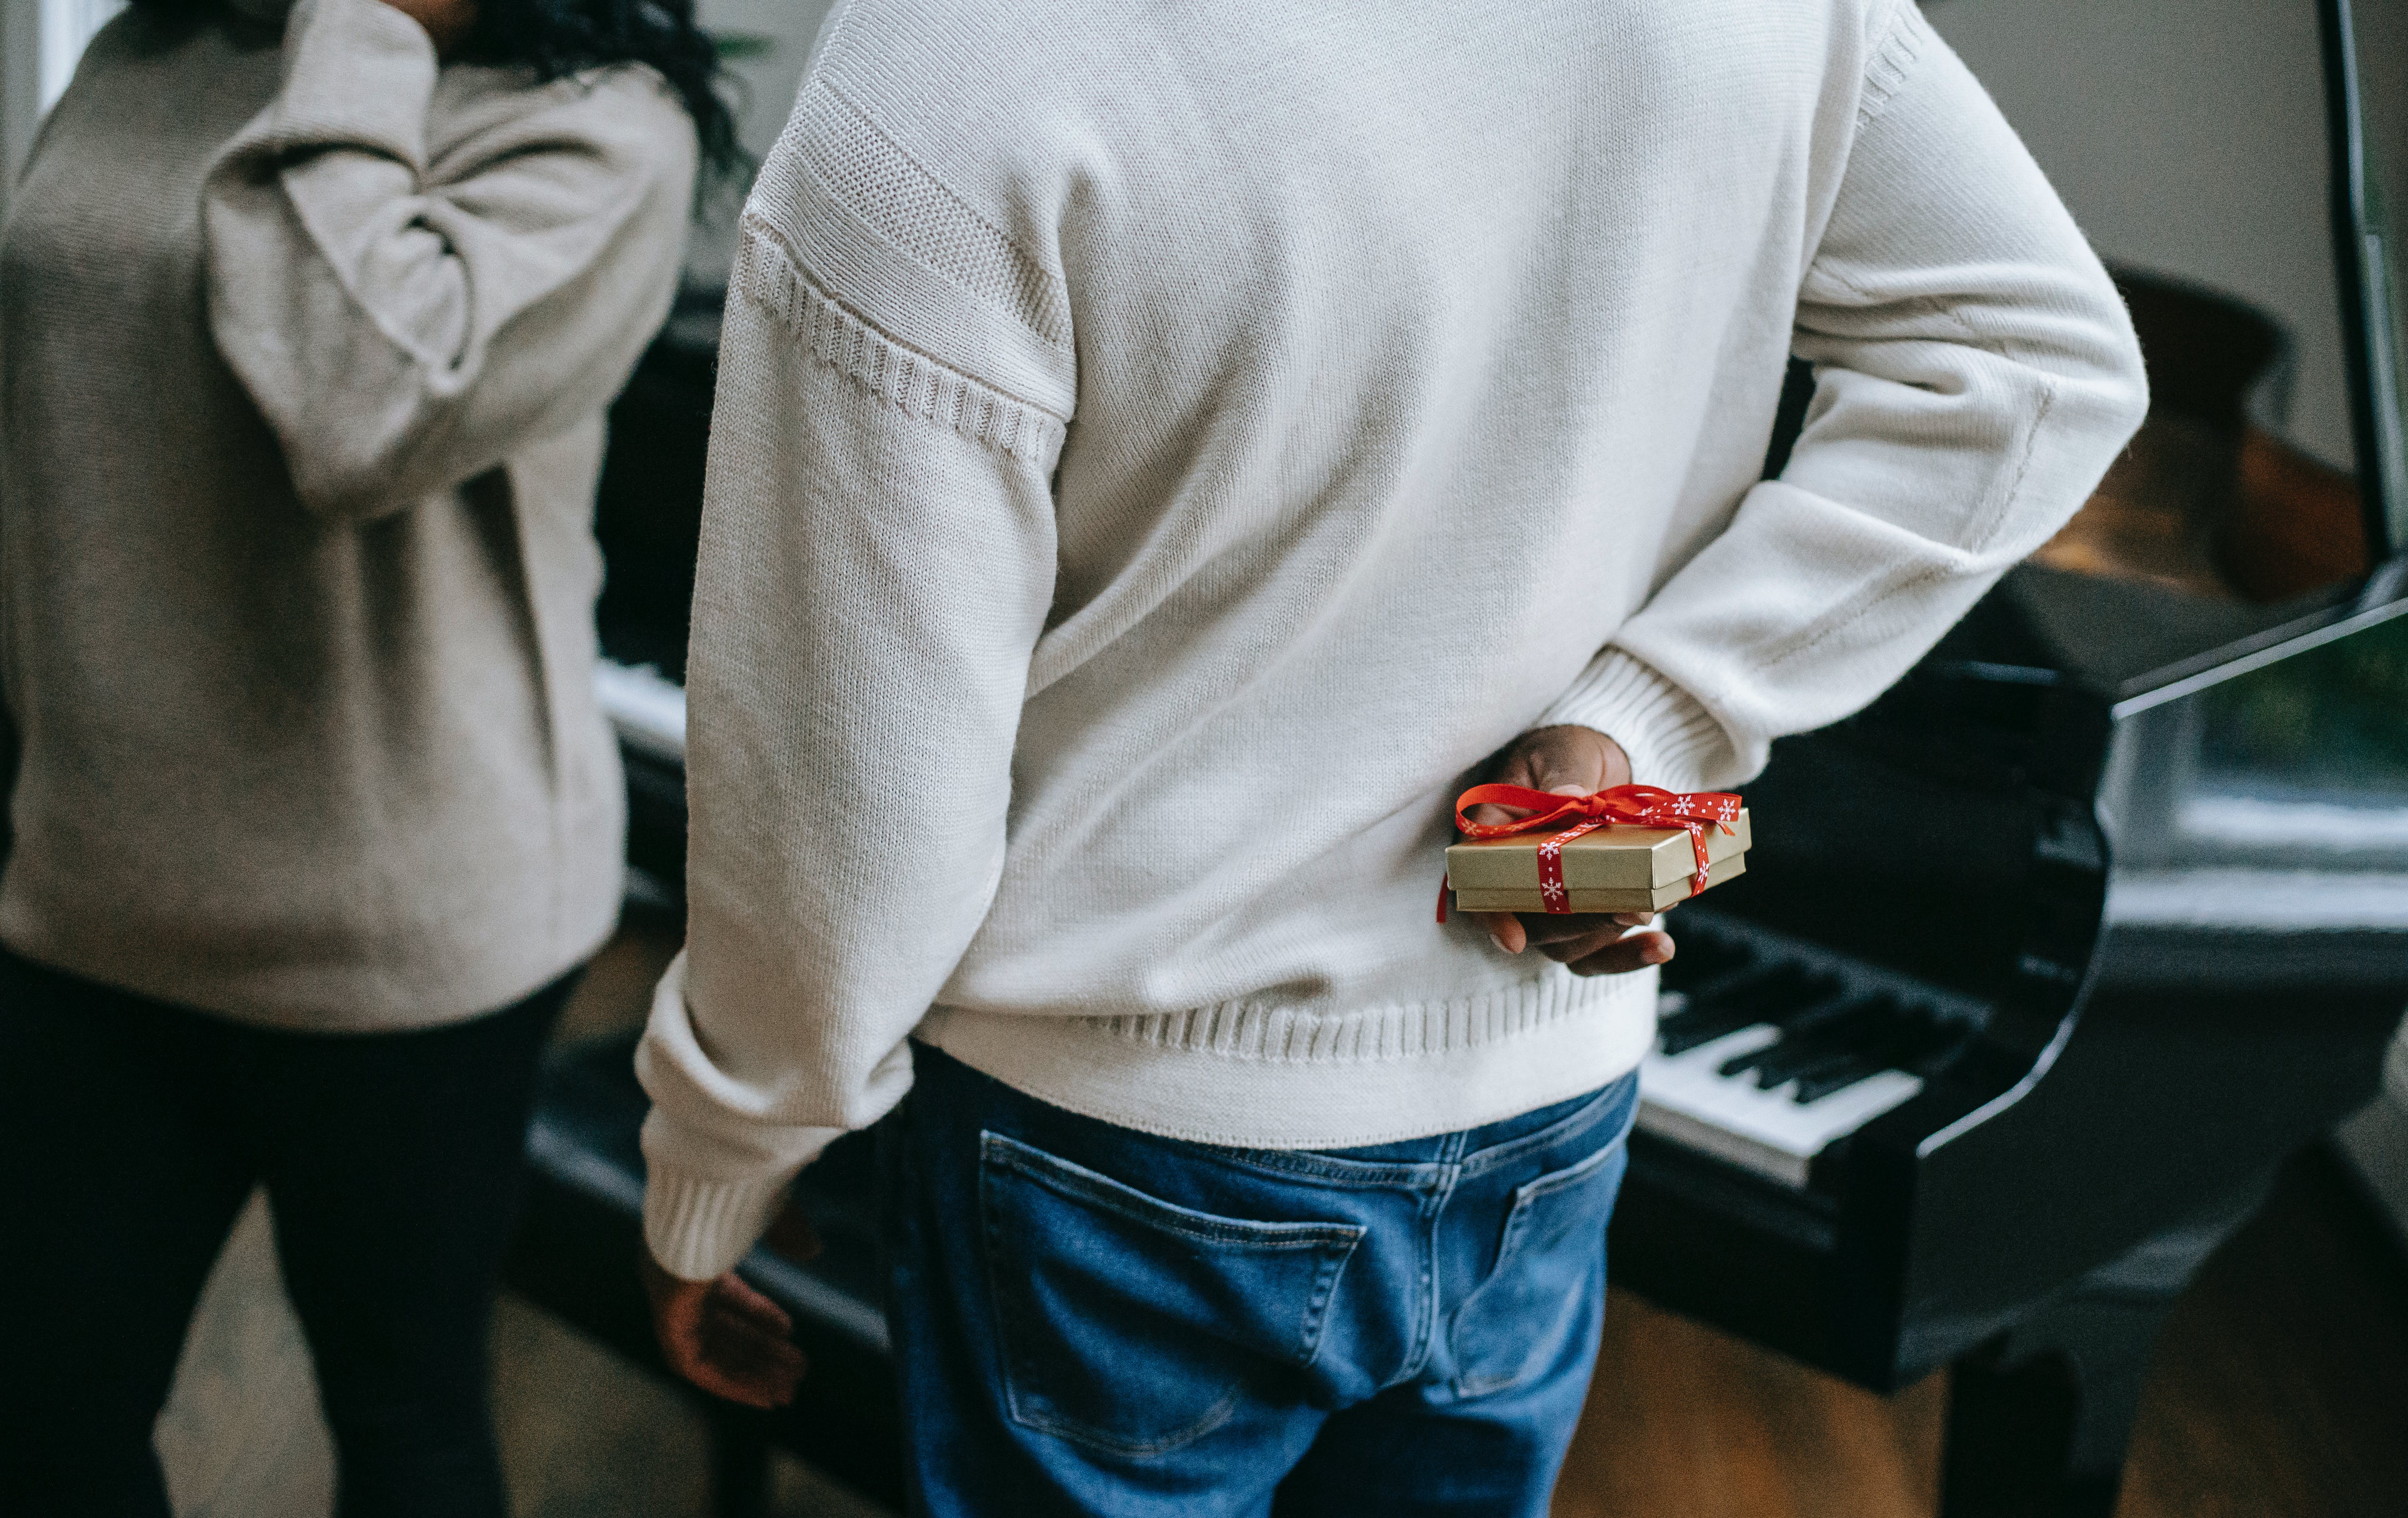 A man holding a Christmas gift | Source: Pexels